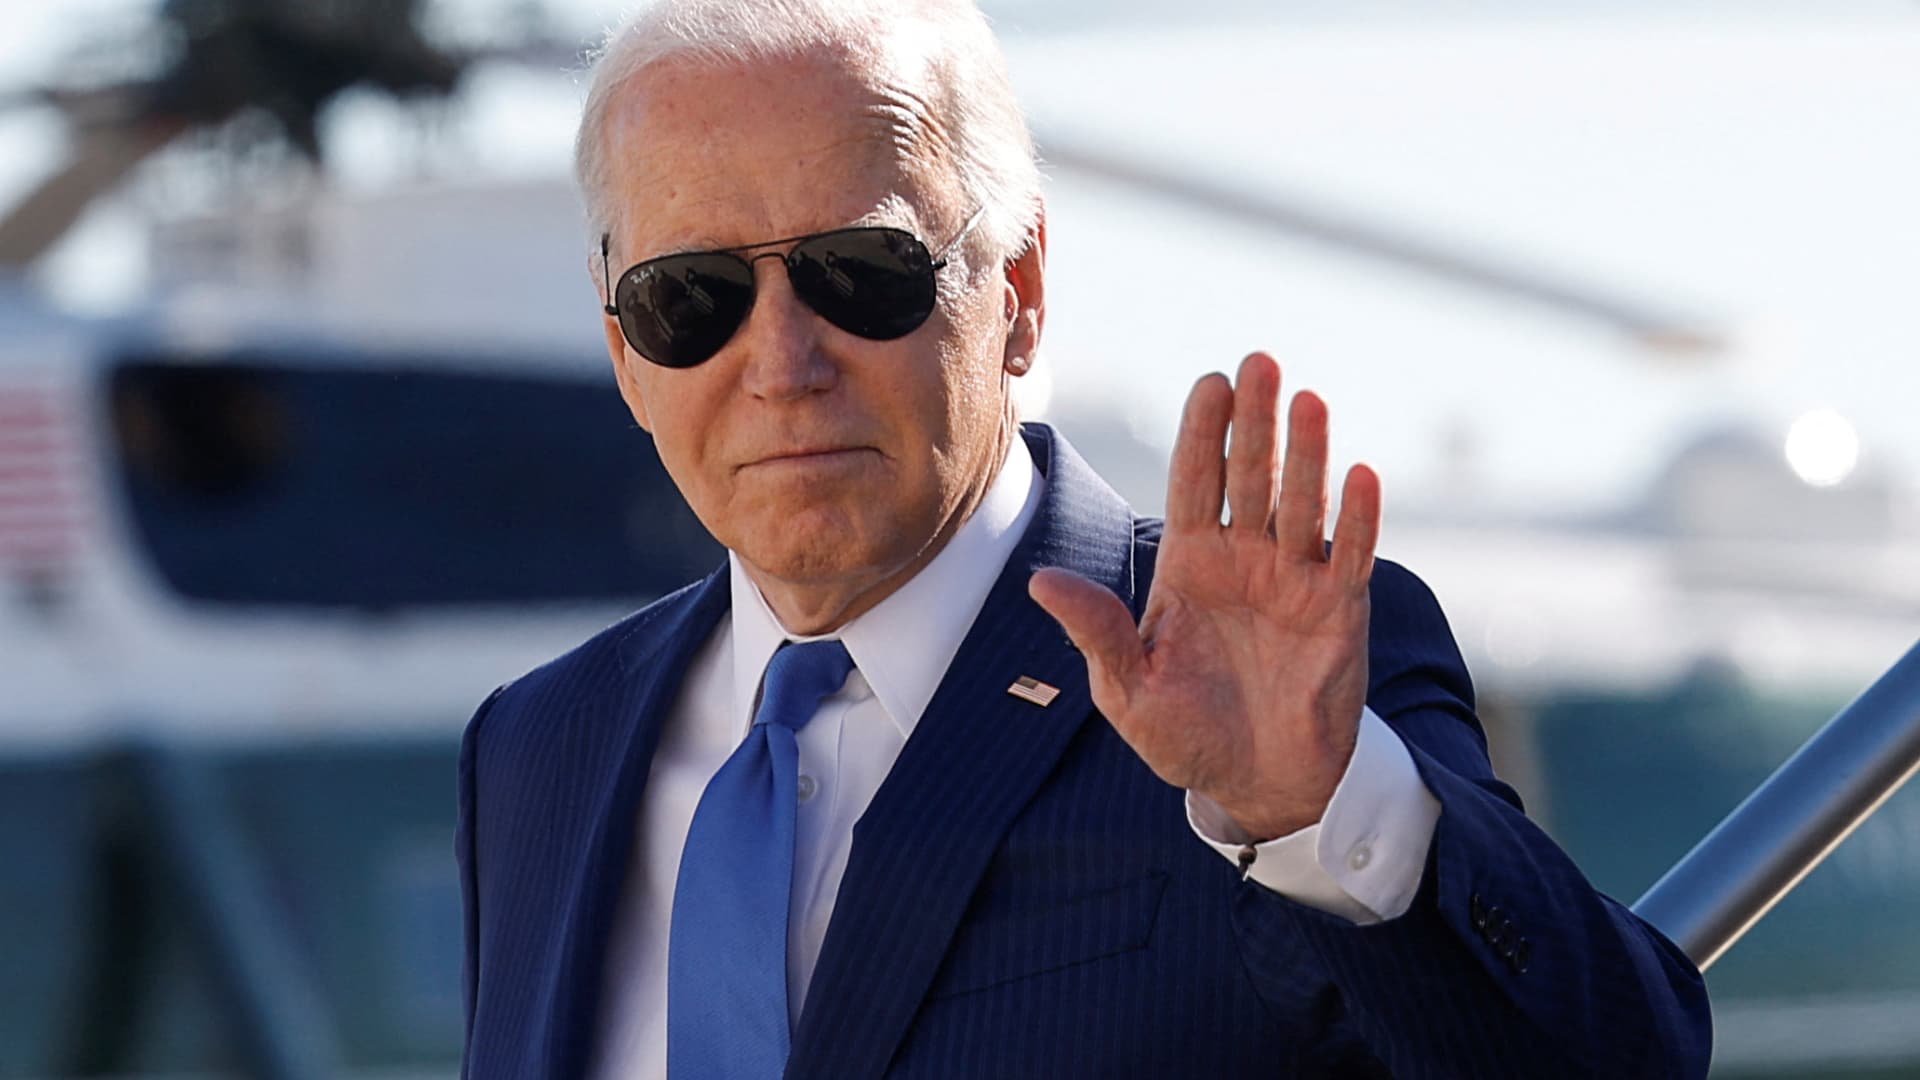 Biden campaign debuts official TikTok account, but app is even now banned on most federal government gadgets